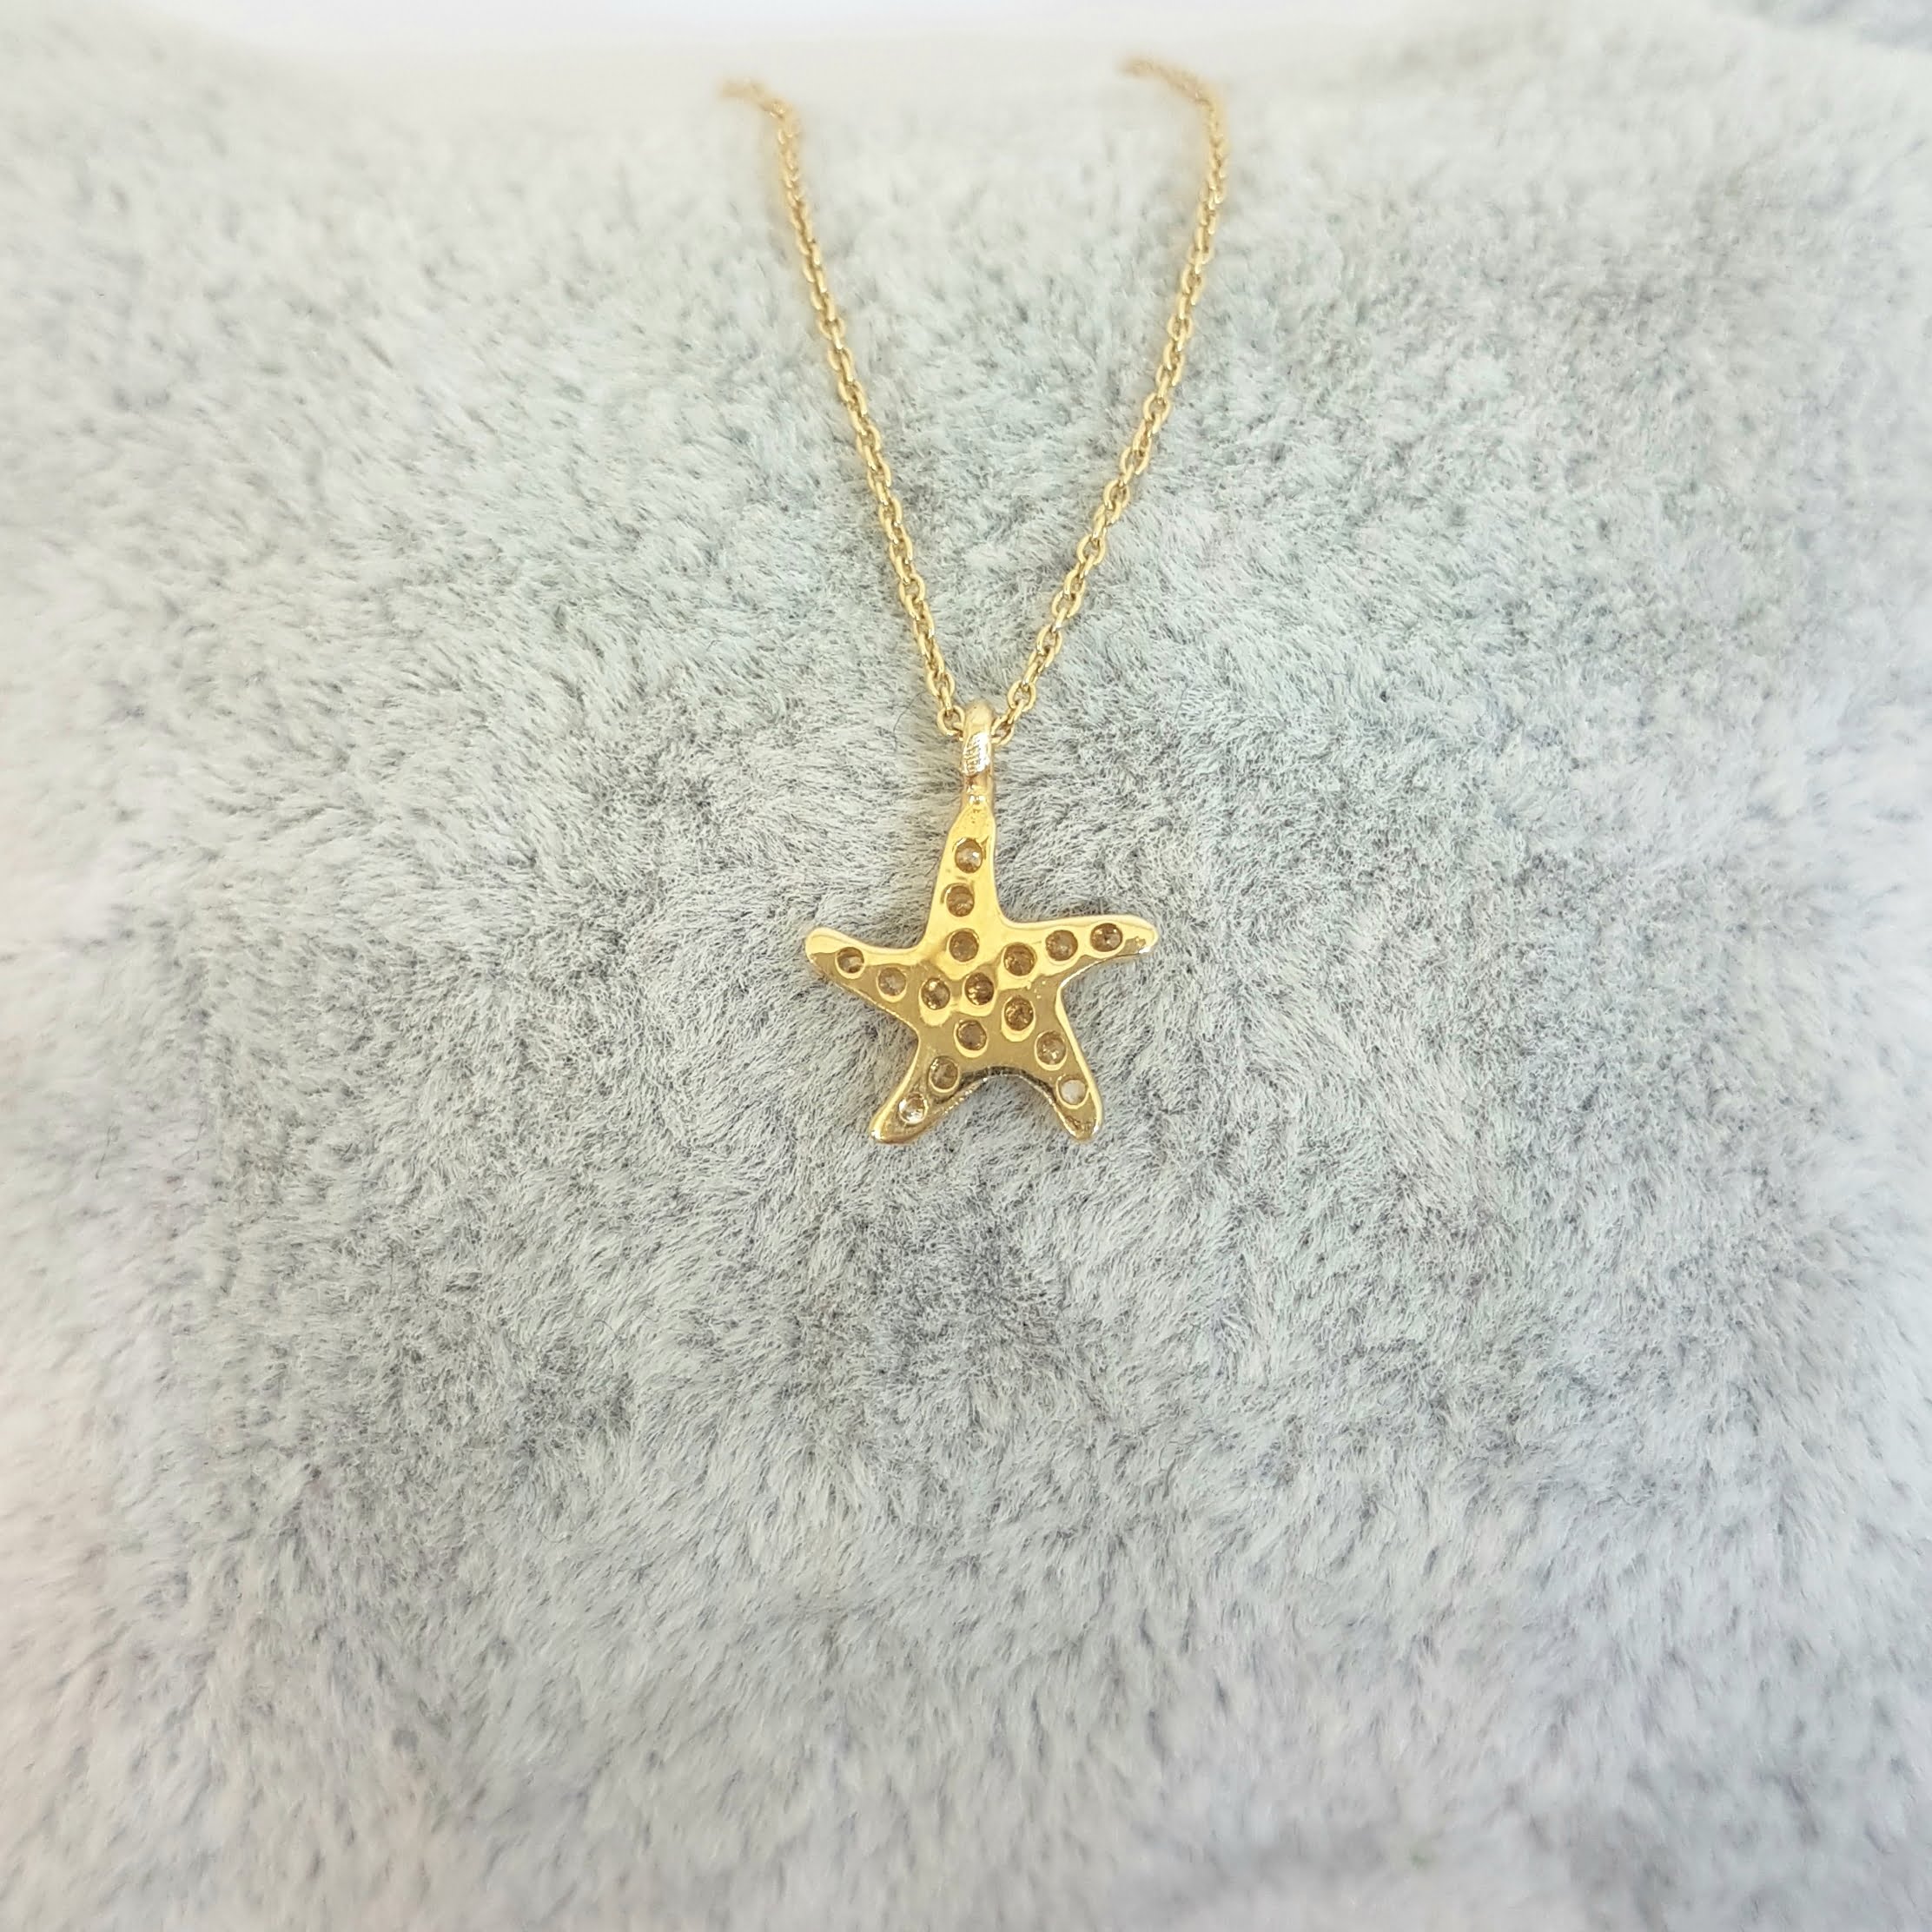 Details about   New Real Solid 14K Gold Small Starfish Charm 